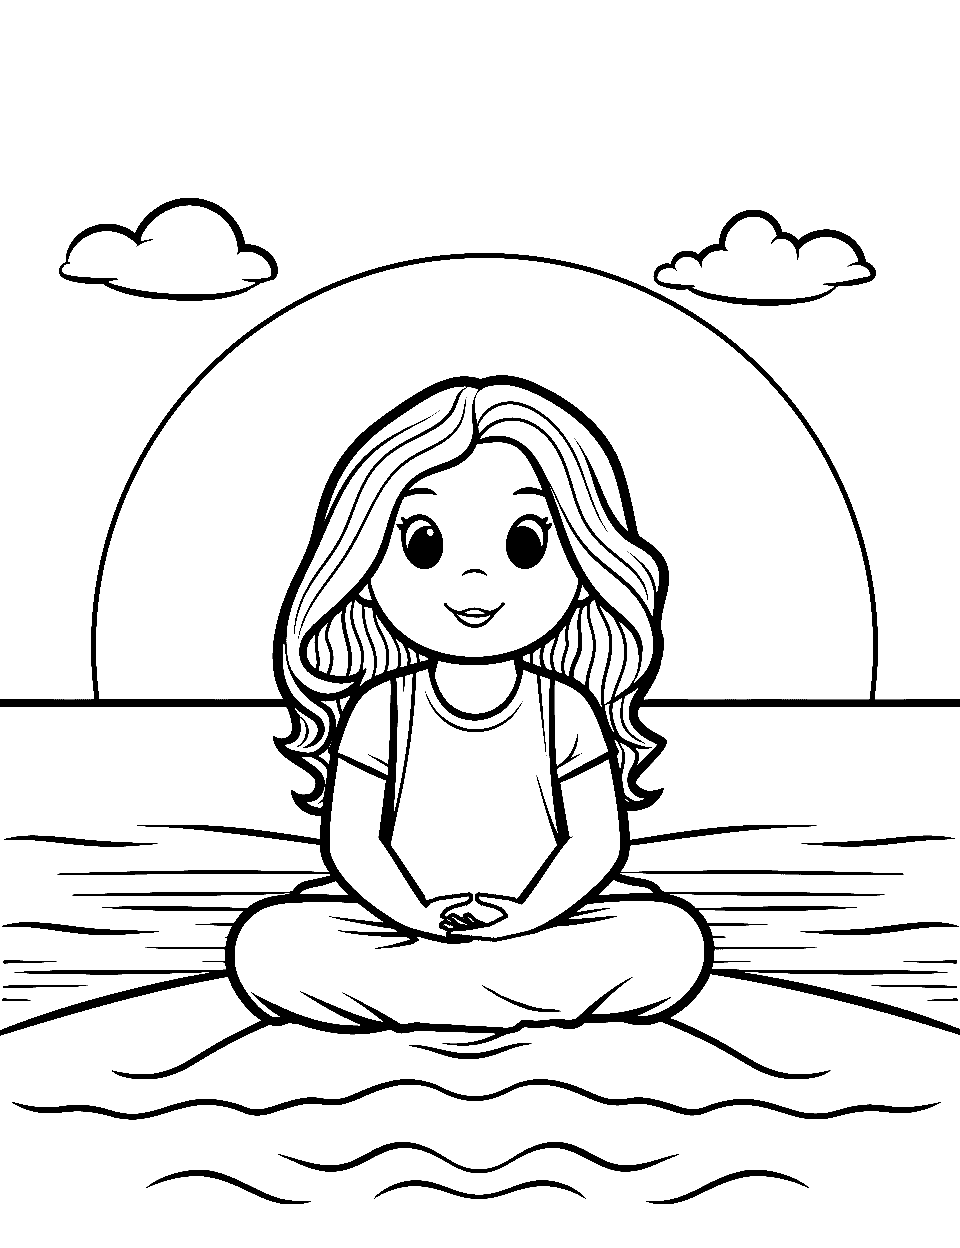 Sunset Seashore Serenity Coloring Page - Shopkin relaxing on a beach during sunset.